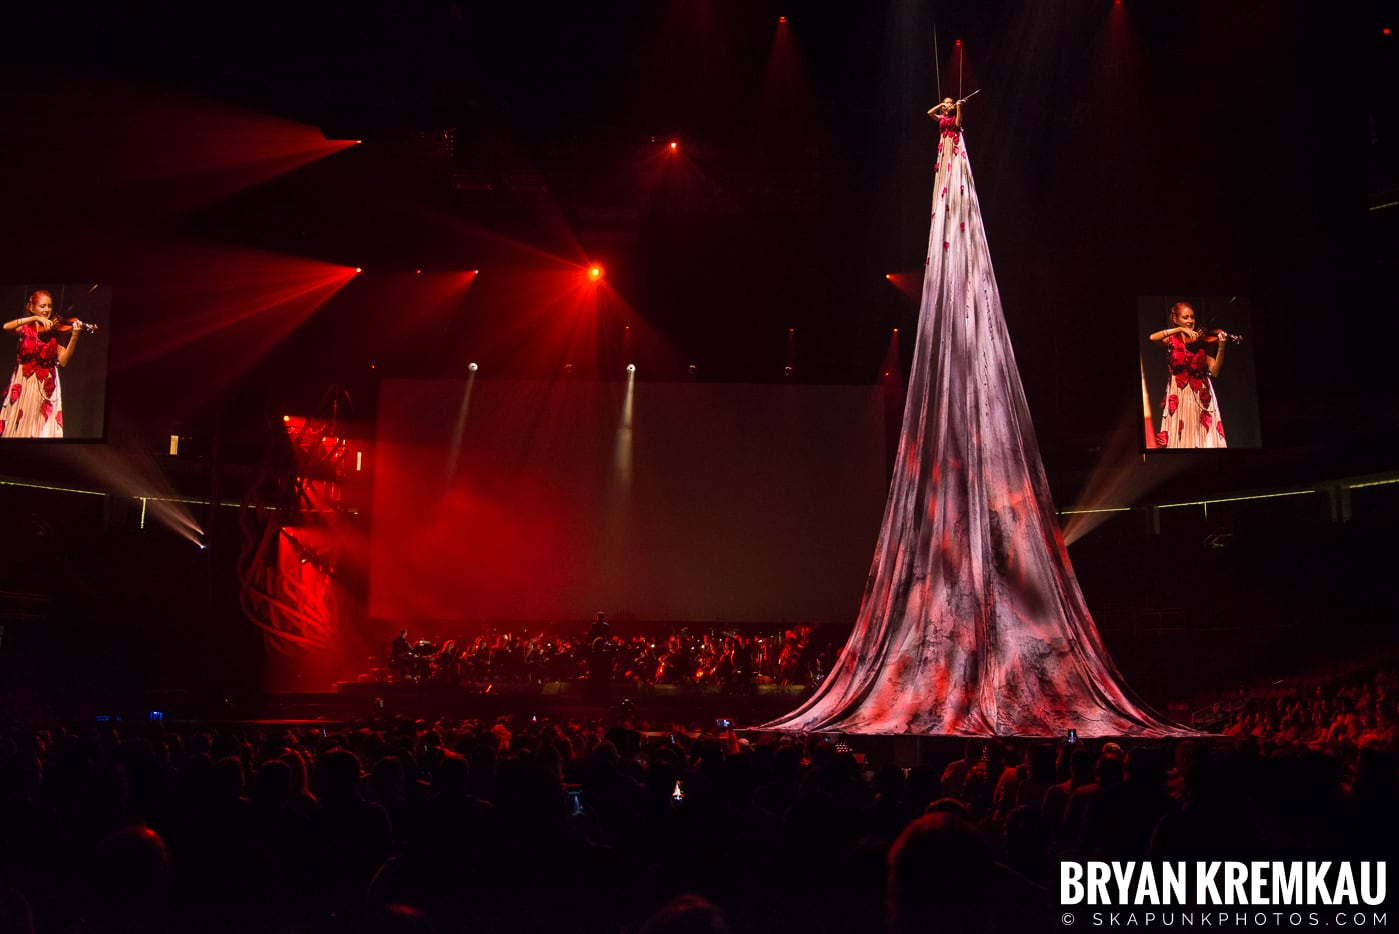 Game of Thrones Live Experience @ Prudential Center, Newark, NJ - 9.26.18 (11)